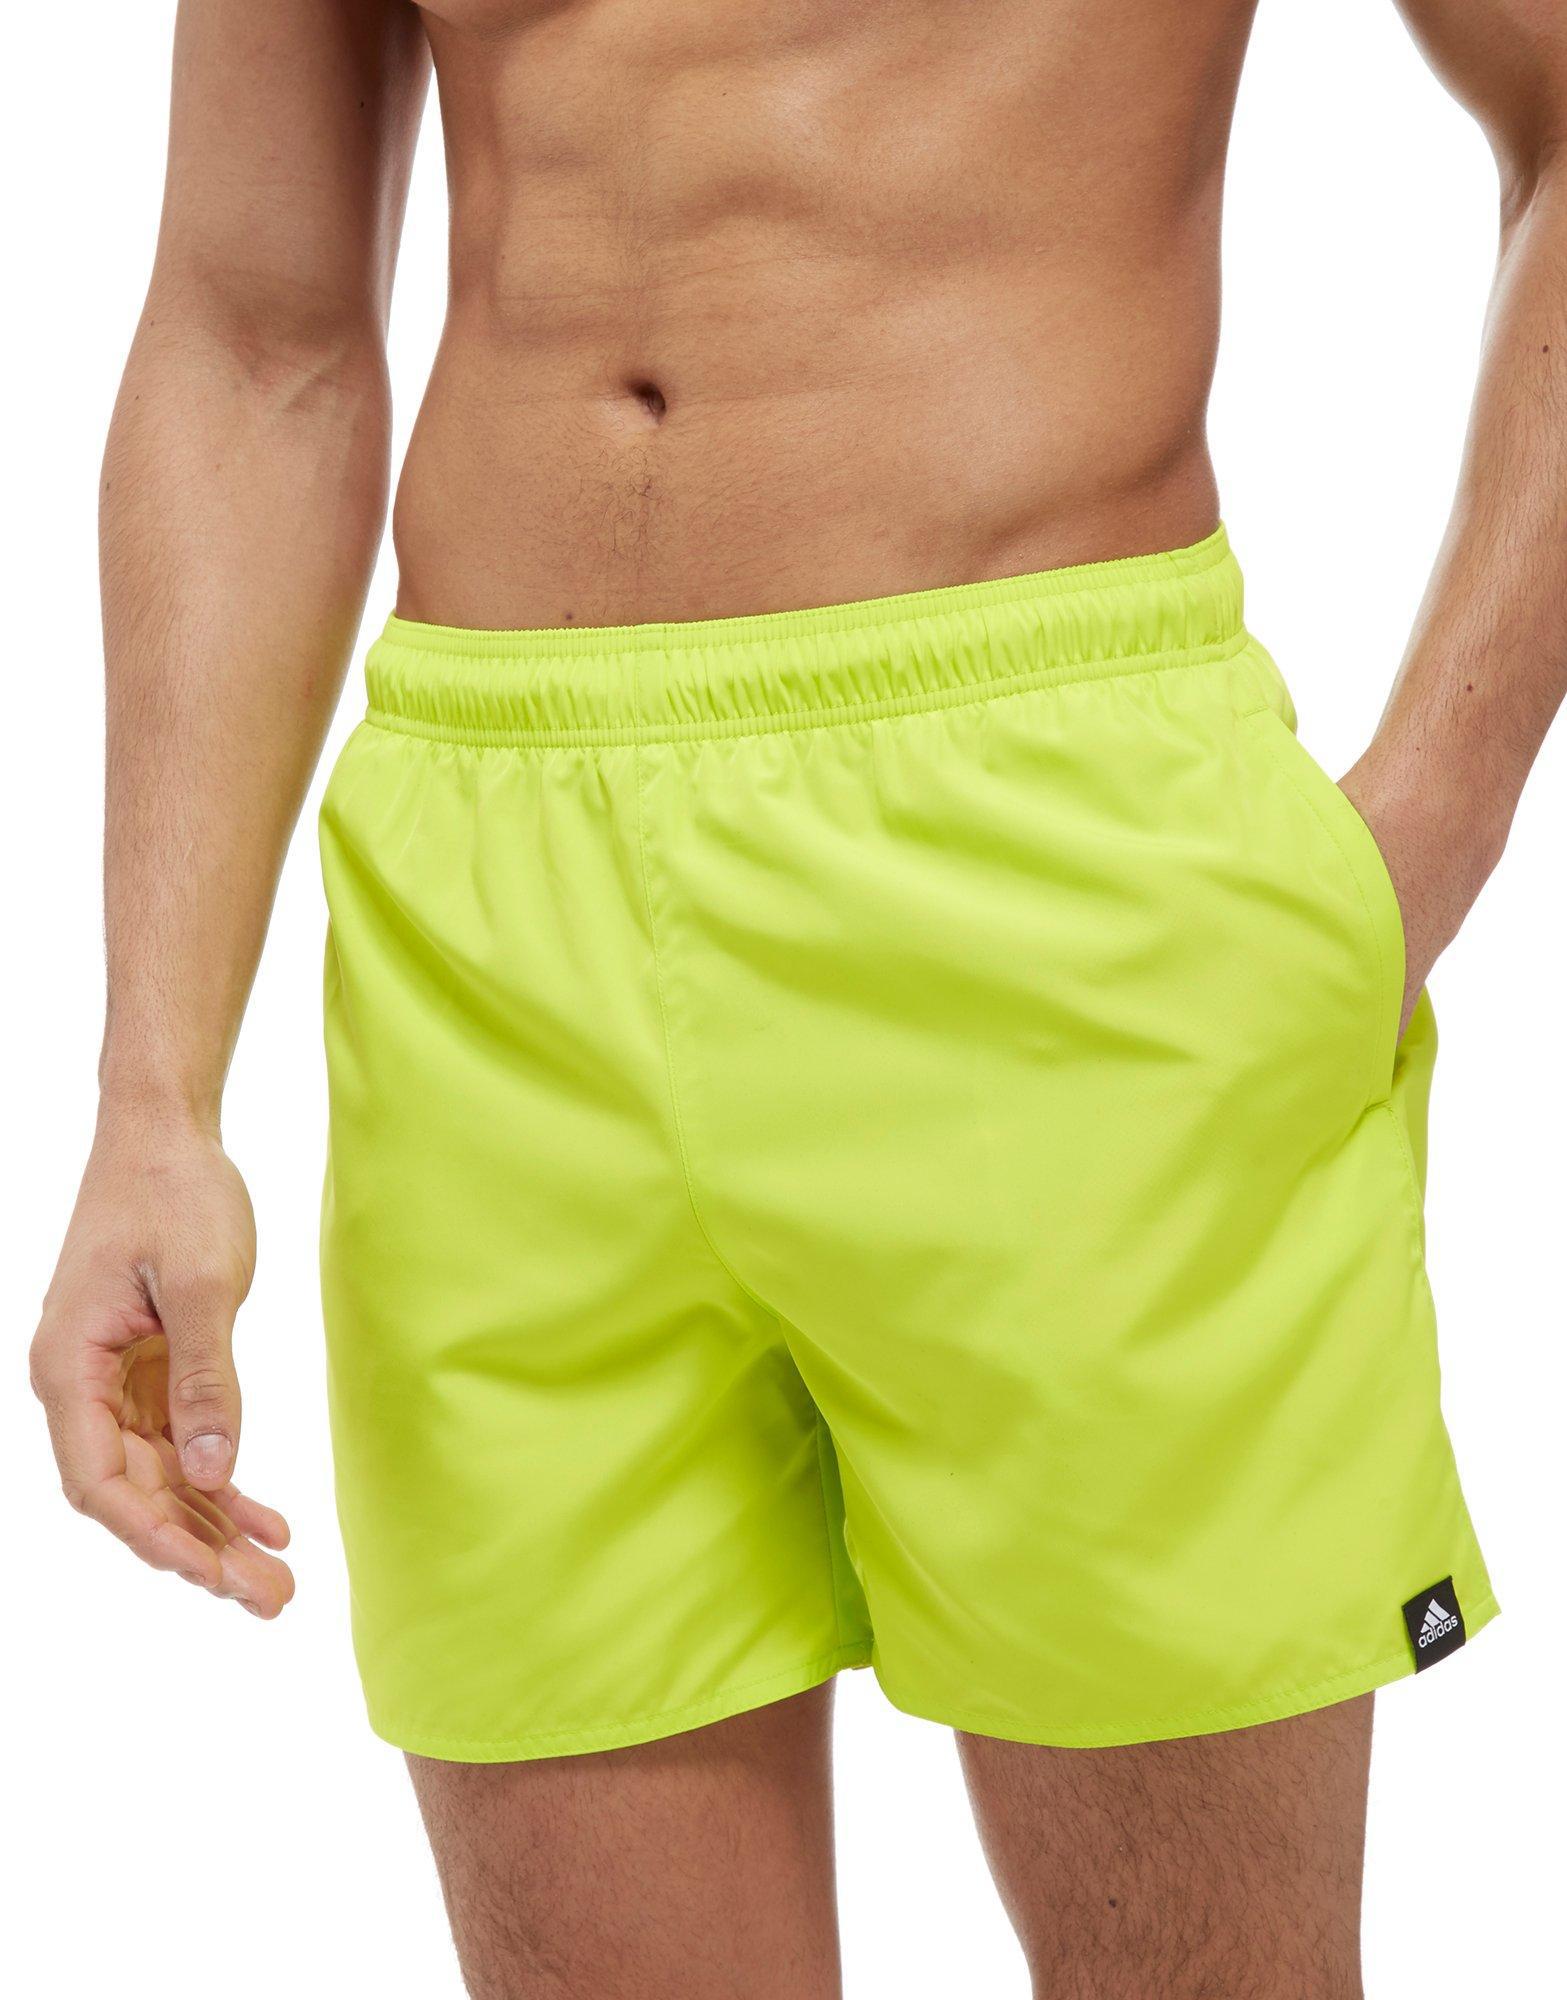 Lyst - adidas Solid Swim Shorts in Yellow for Men